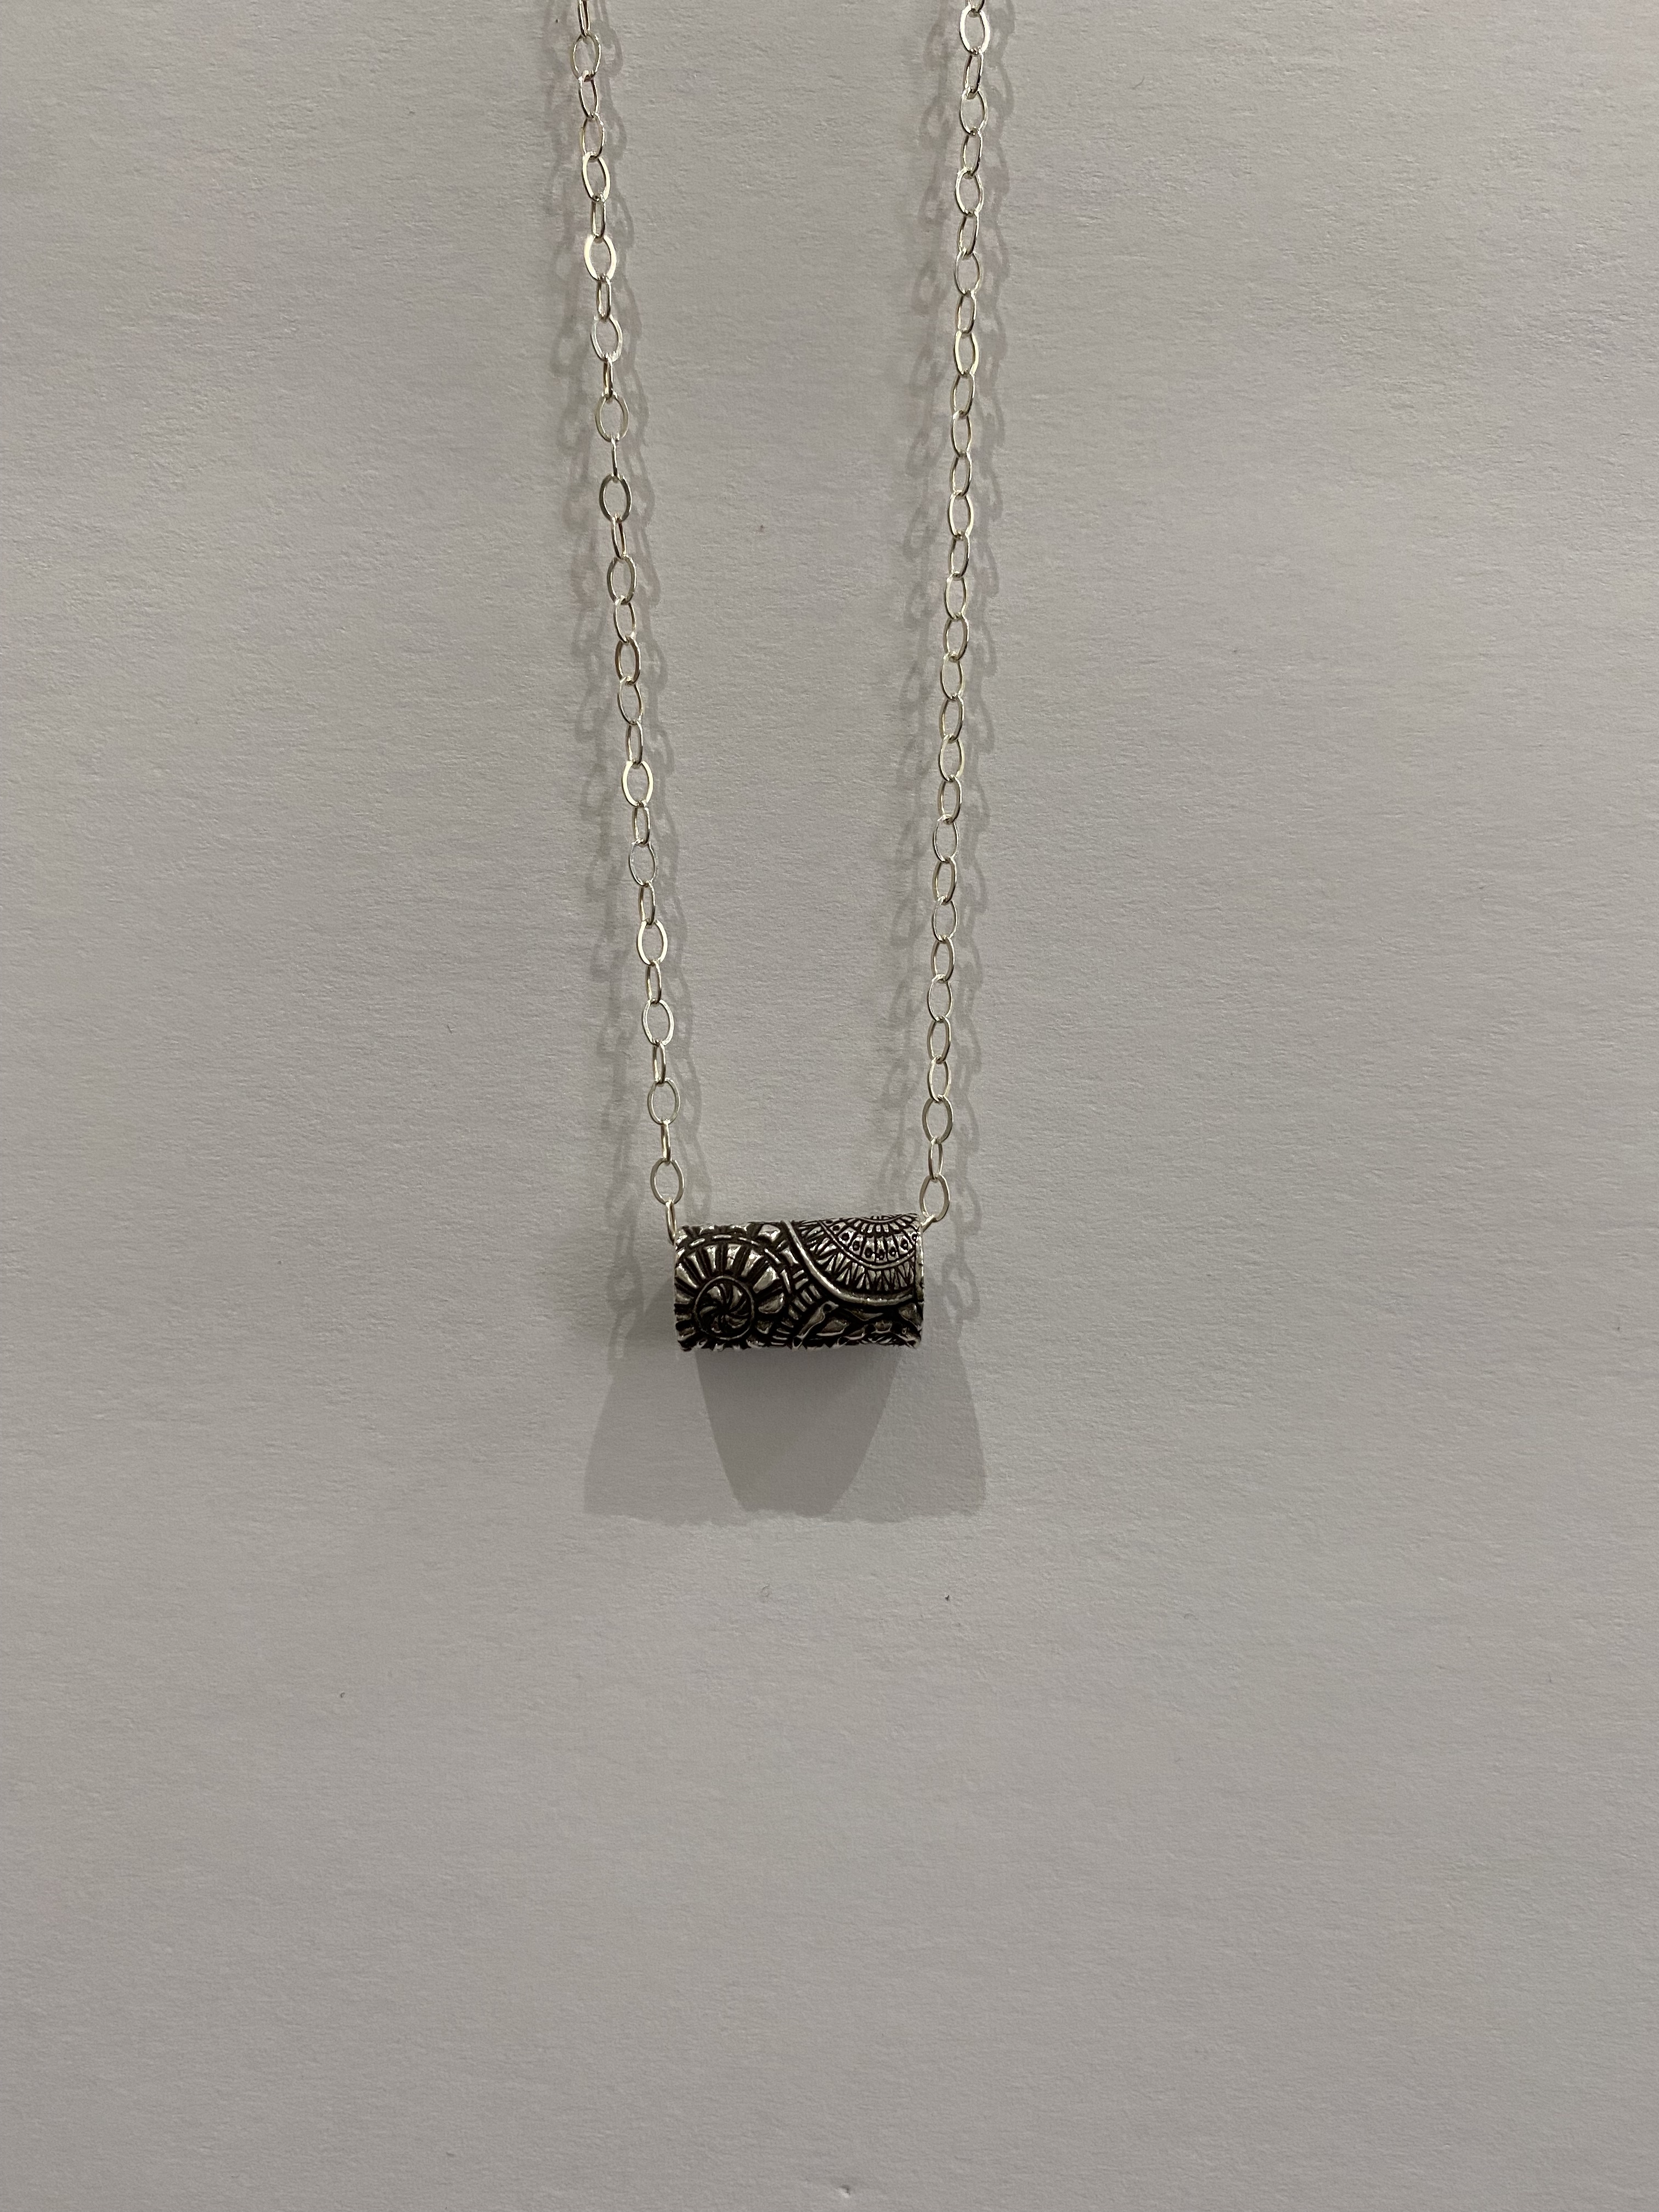 Bead PMC Necklace
Sterling Silver
$40.